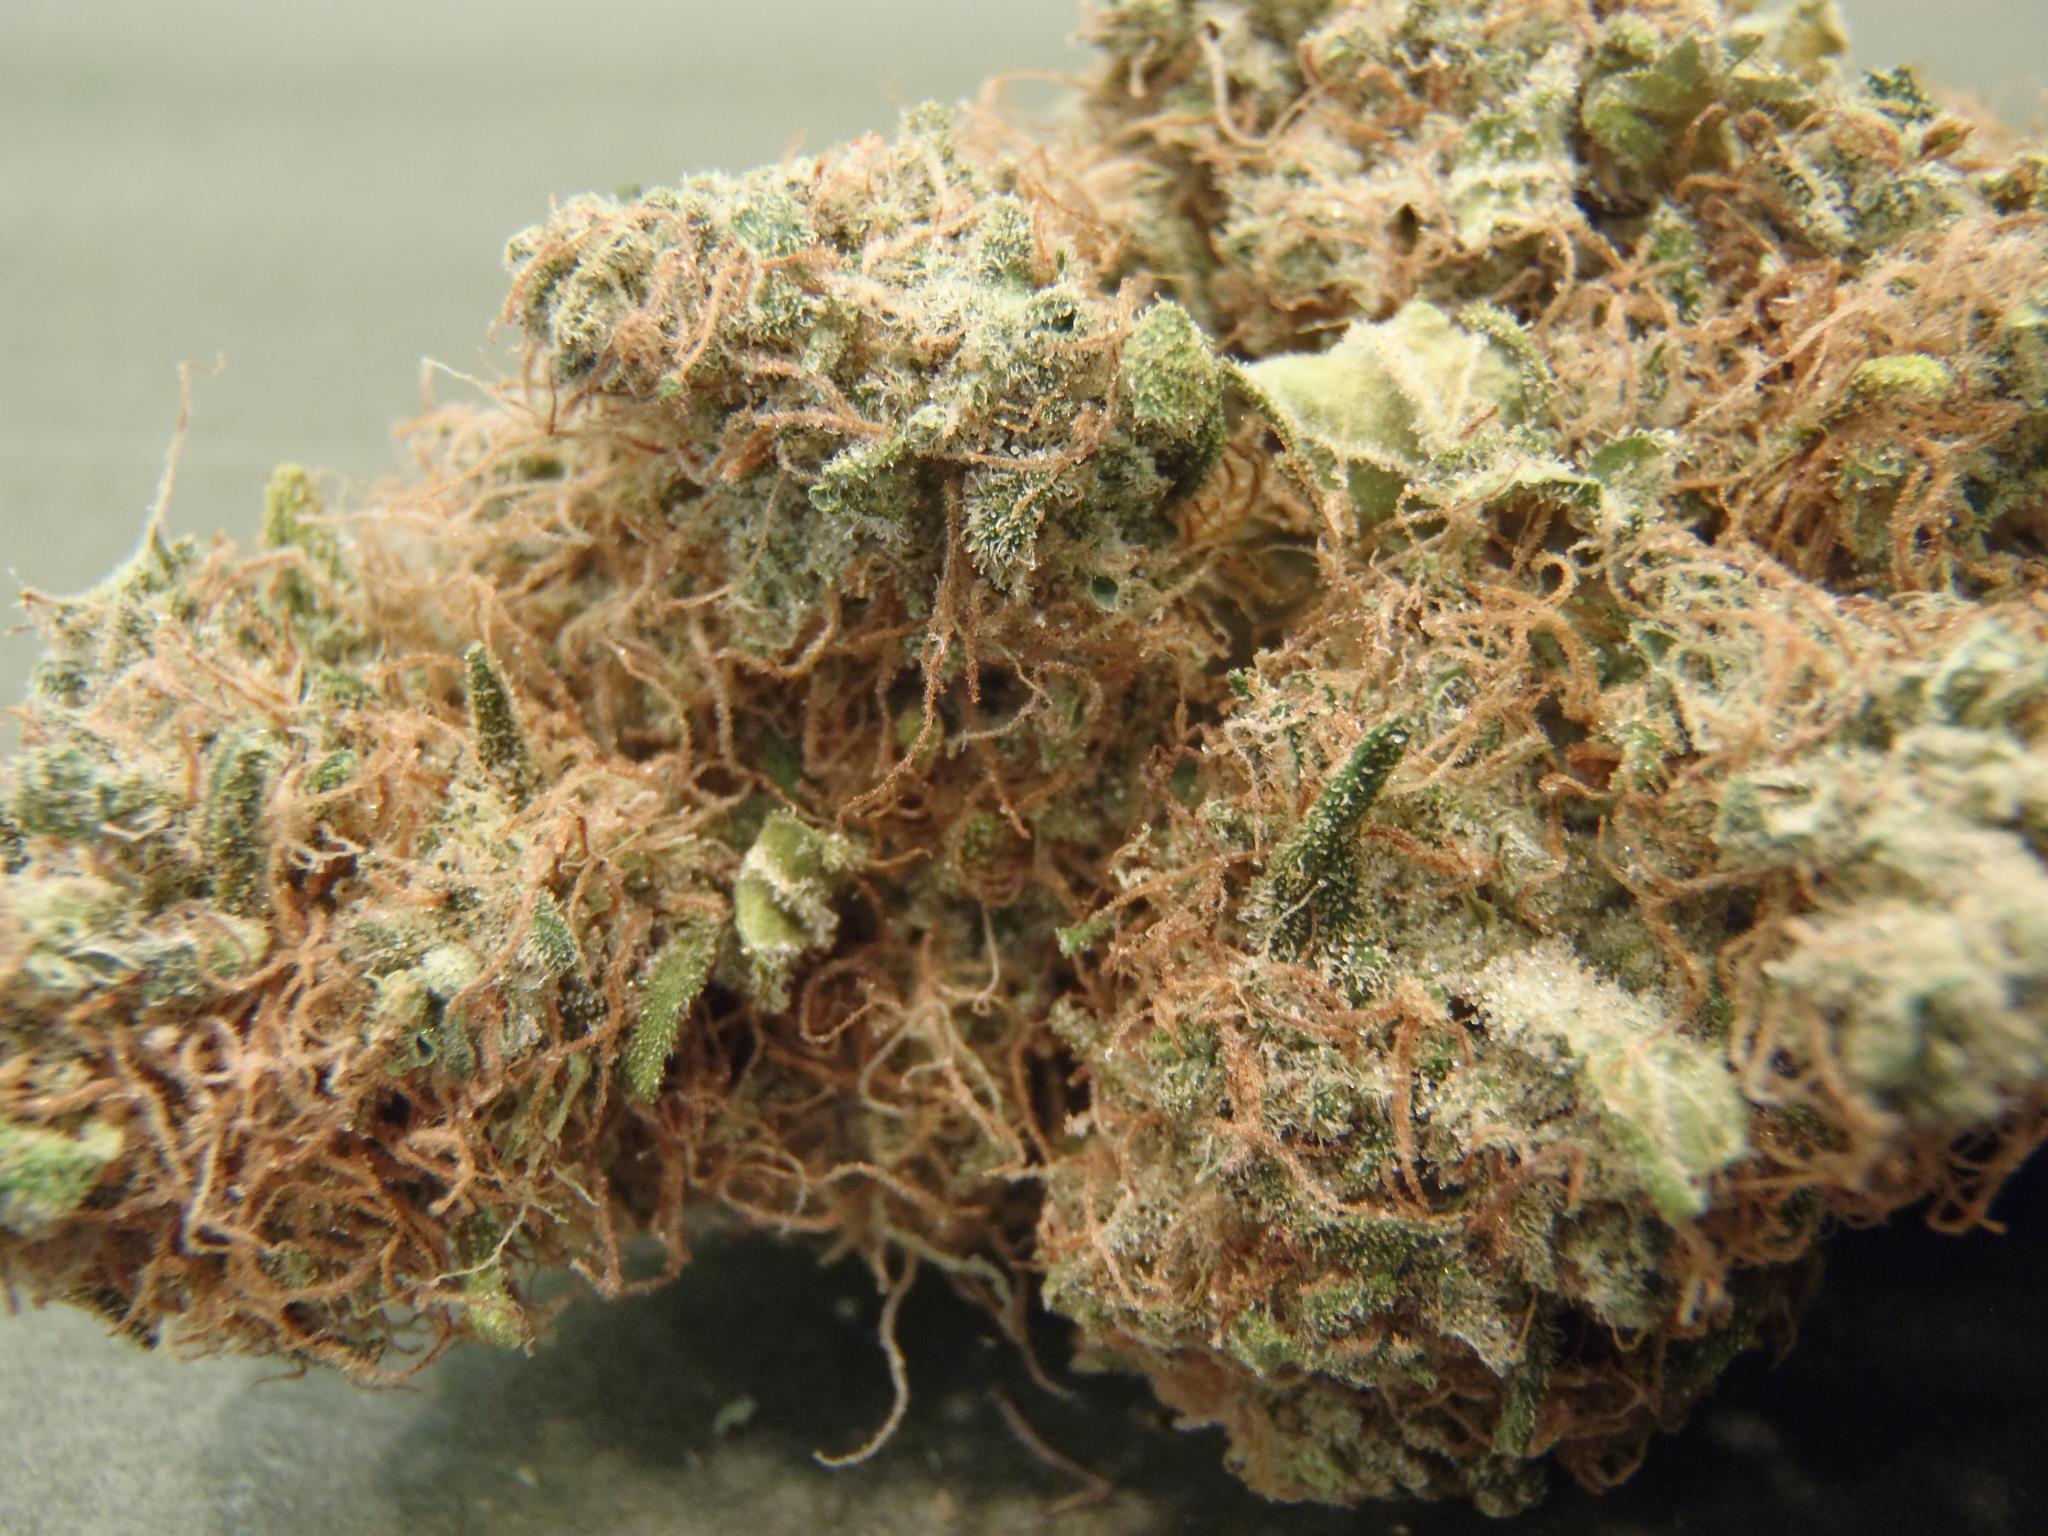 ABOUT THIS STRAIN As winner of Cannabis Cup awards, the AK-47 strain certai...